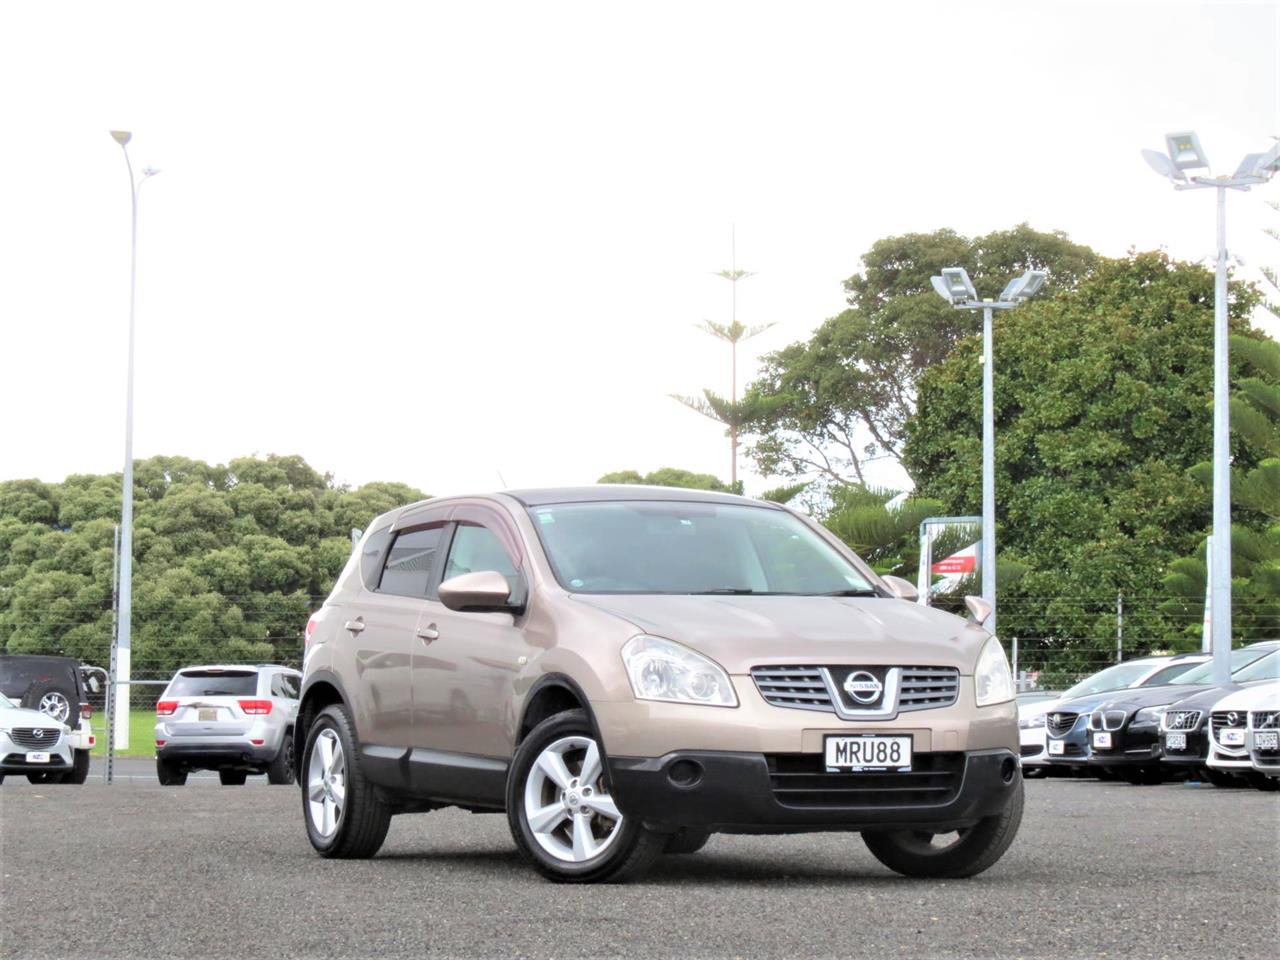 NZC 2007 Nissan DUALIS just arrived to Auckland